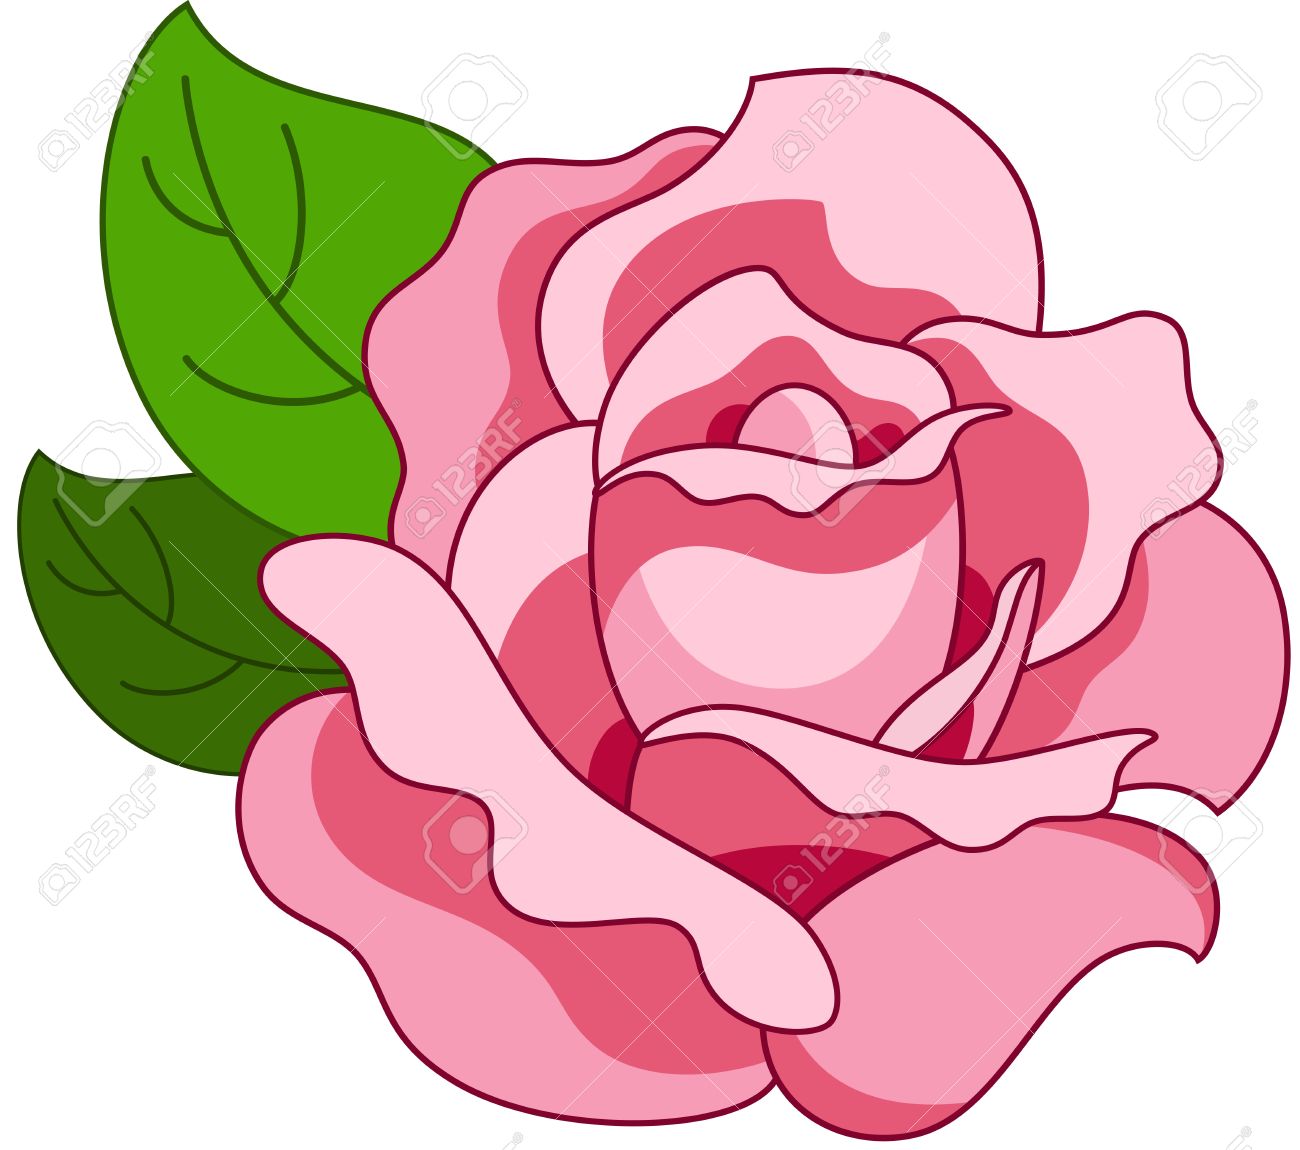 rose cartoon Cartoon rose drawing roses draw how to an easy gif - Clipartix